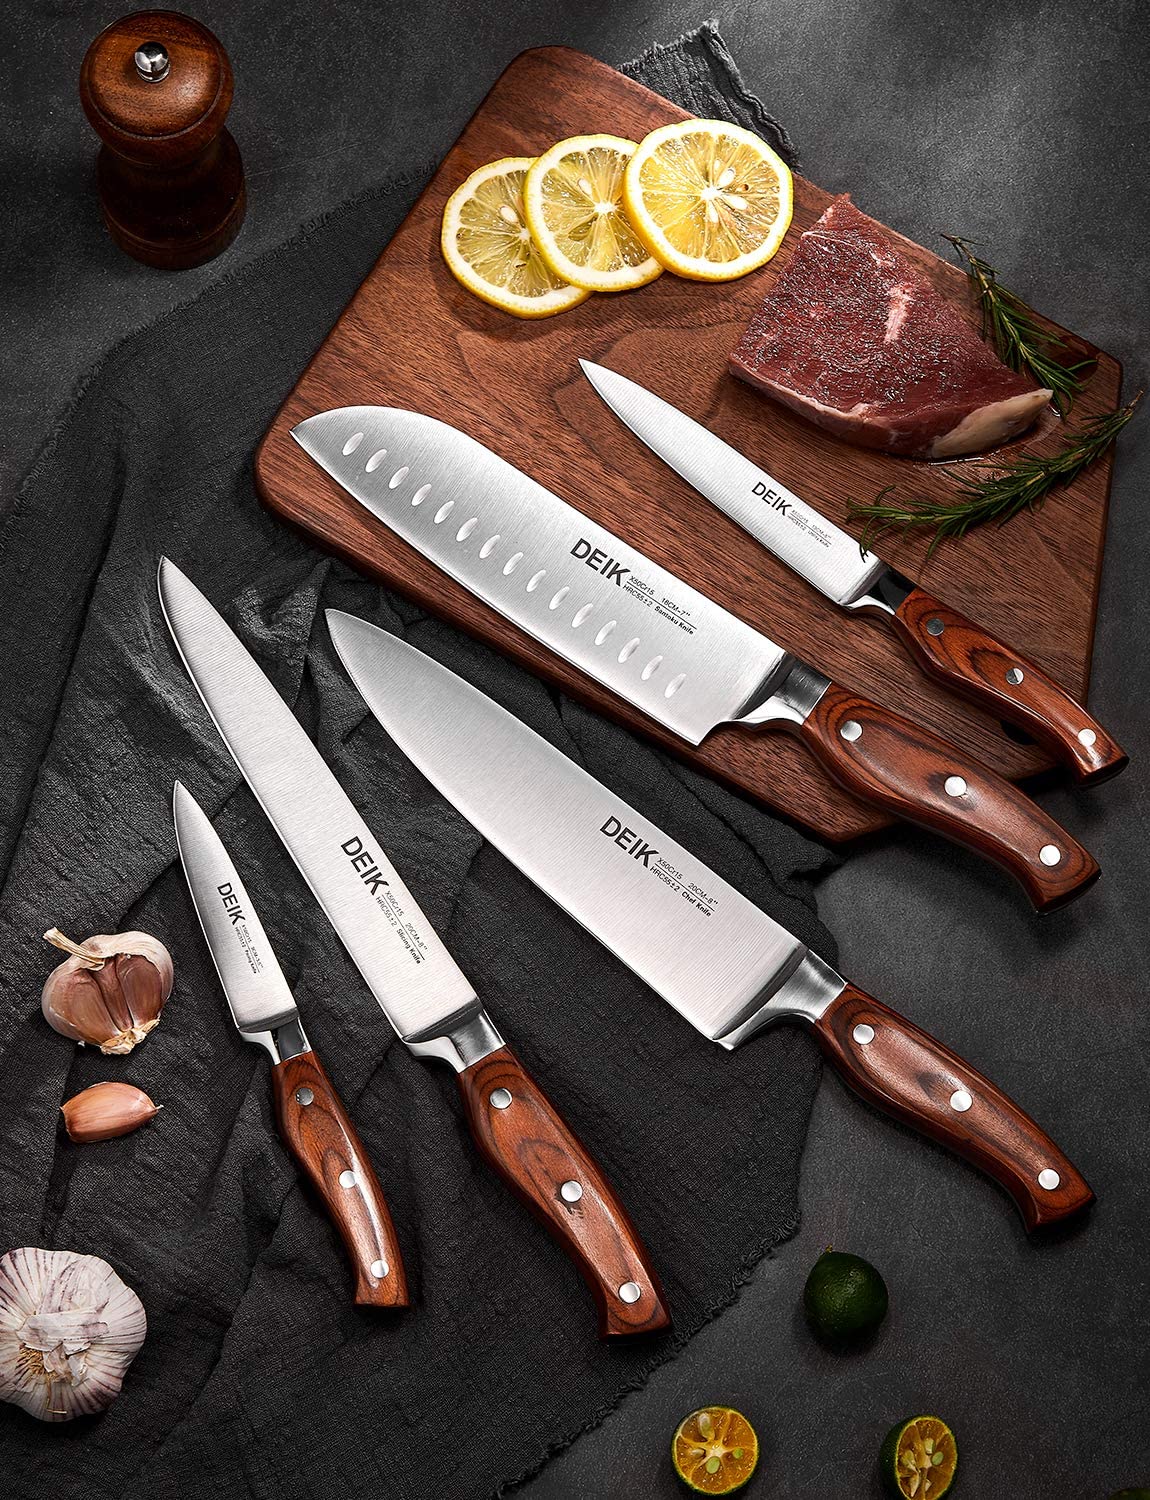 Deik | Knife Set, High Carbon Stainless Steel Kitchen Knife Set 16PCS, Super Sharp Cutlery Knife with Carving Fork and Serrated Steak Knives